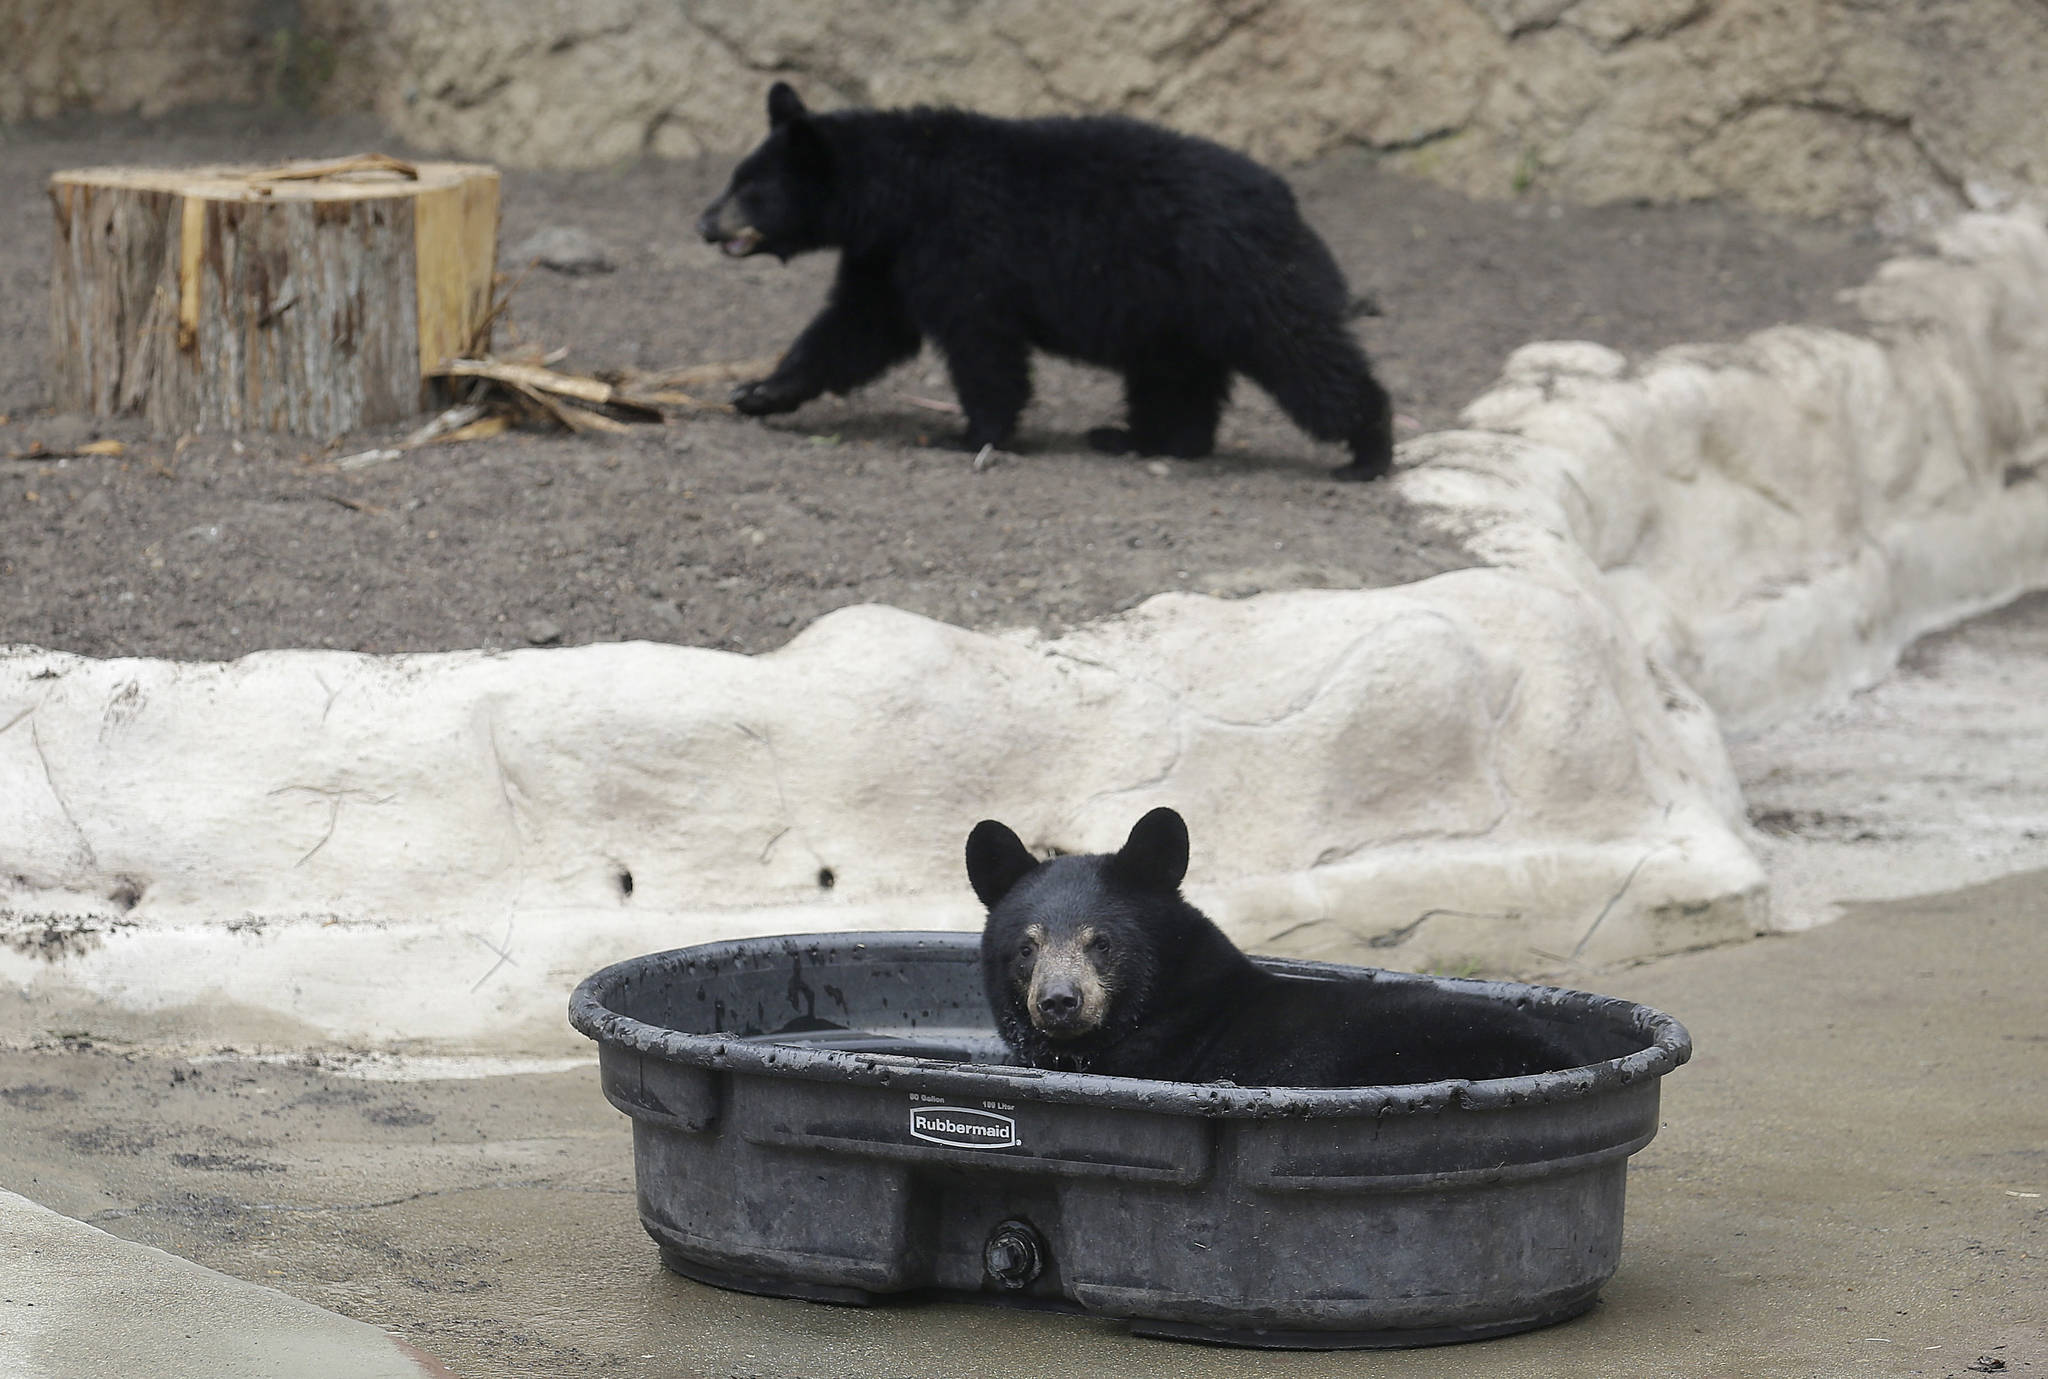 A male black bear cub, foreground, sits in a tub as a female black bear cub, rear, walks in their enclosure at the San Francisco Zoo in San Francisco, Tuesday, Aug. 15, 2017. The still nameless cubs that were abandoned by their mothers were found emaciated and wandering alone in Alaska hundreds of miles apart about three months ago. (Jeff Chiu | The Associated Press)